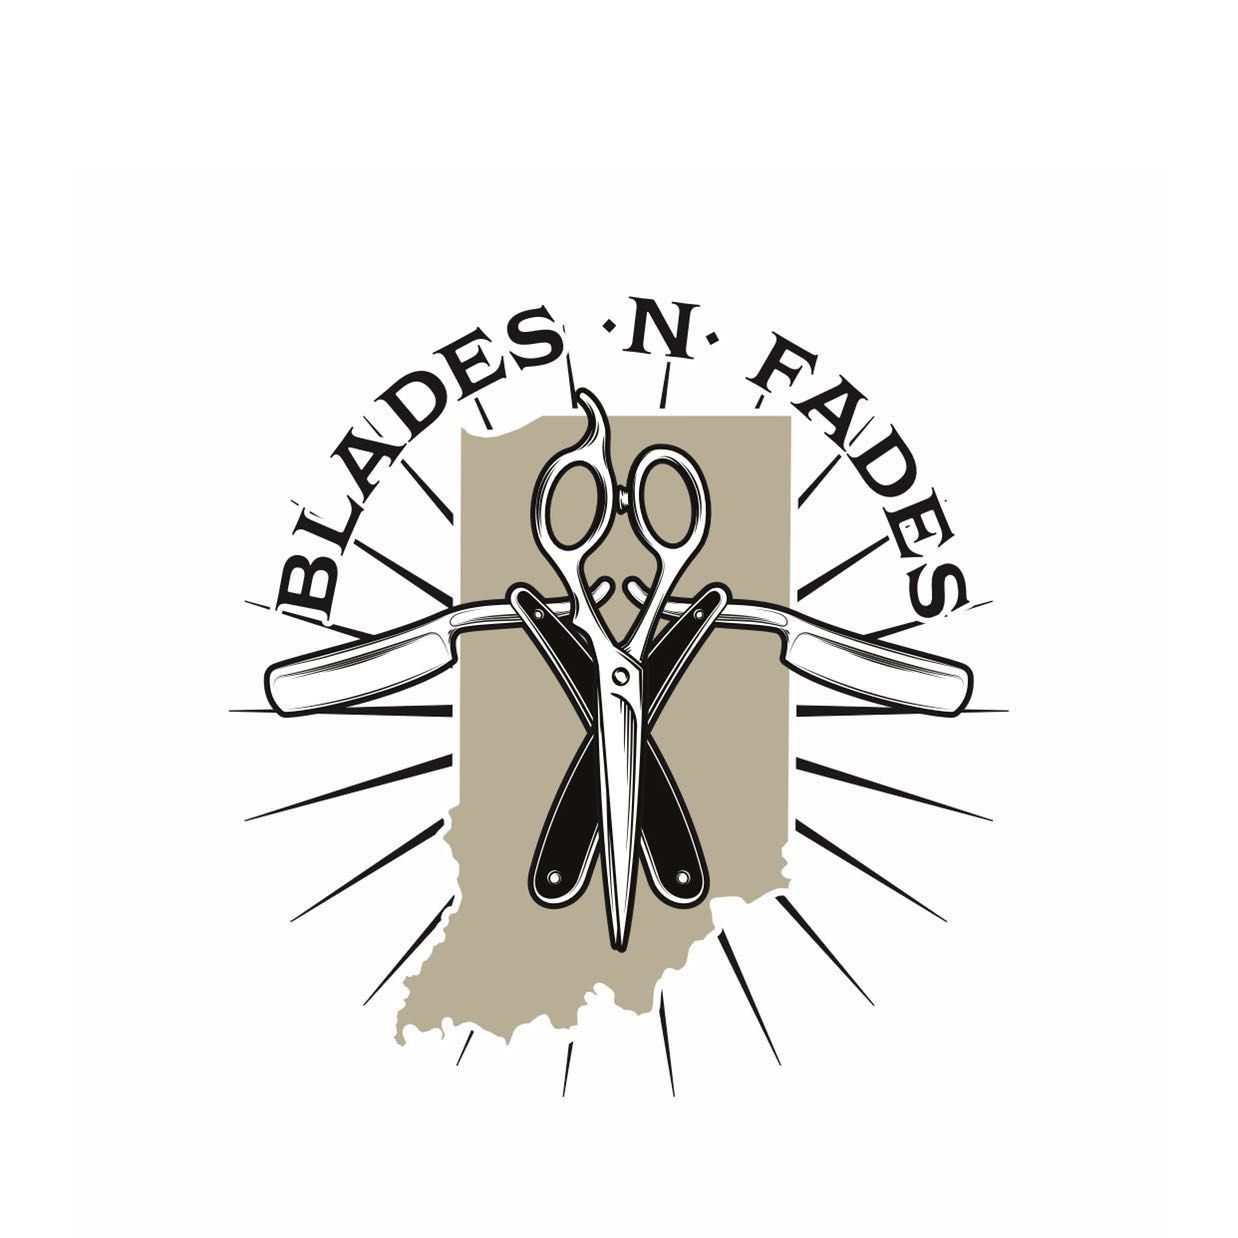 Blades N Fades - Phil, 222 E Commercial Ave, Lowell, 46356